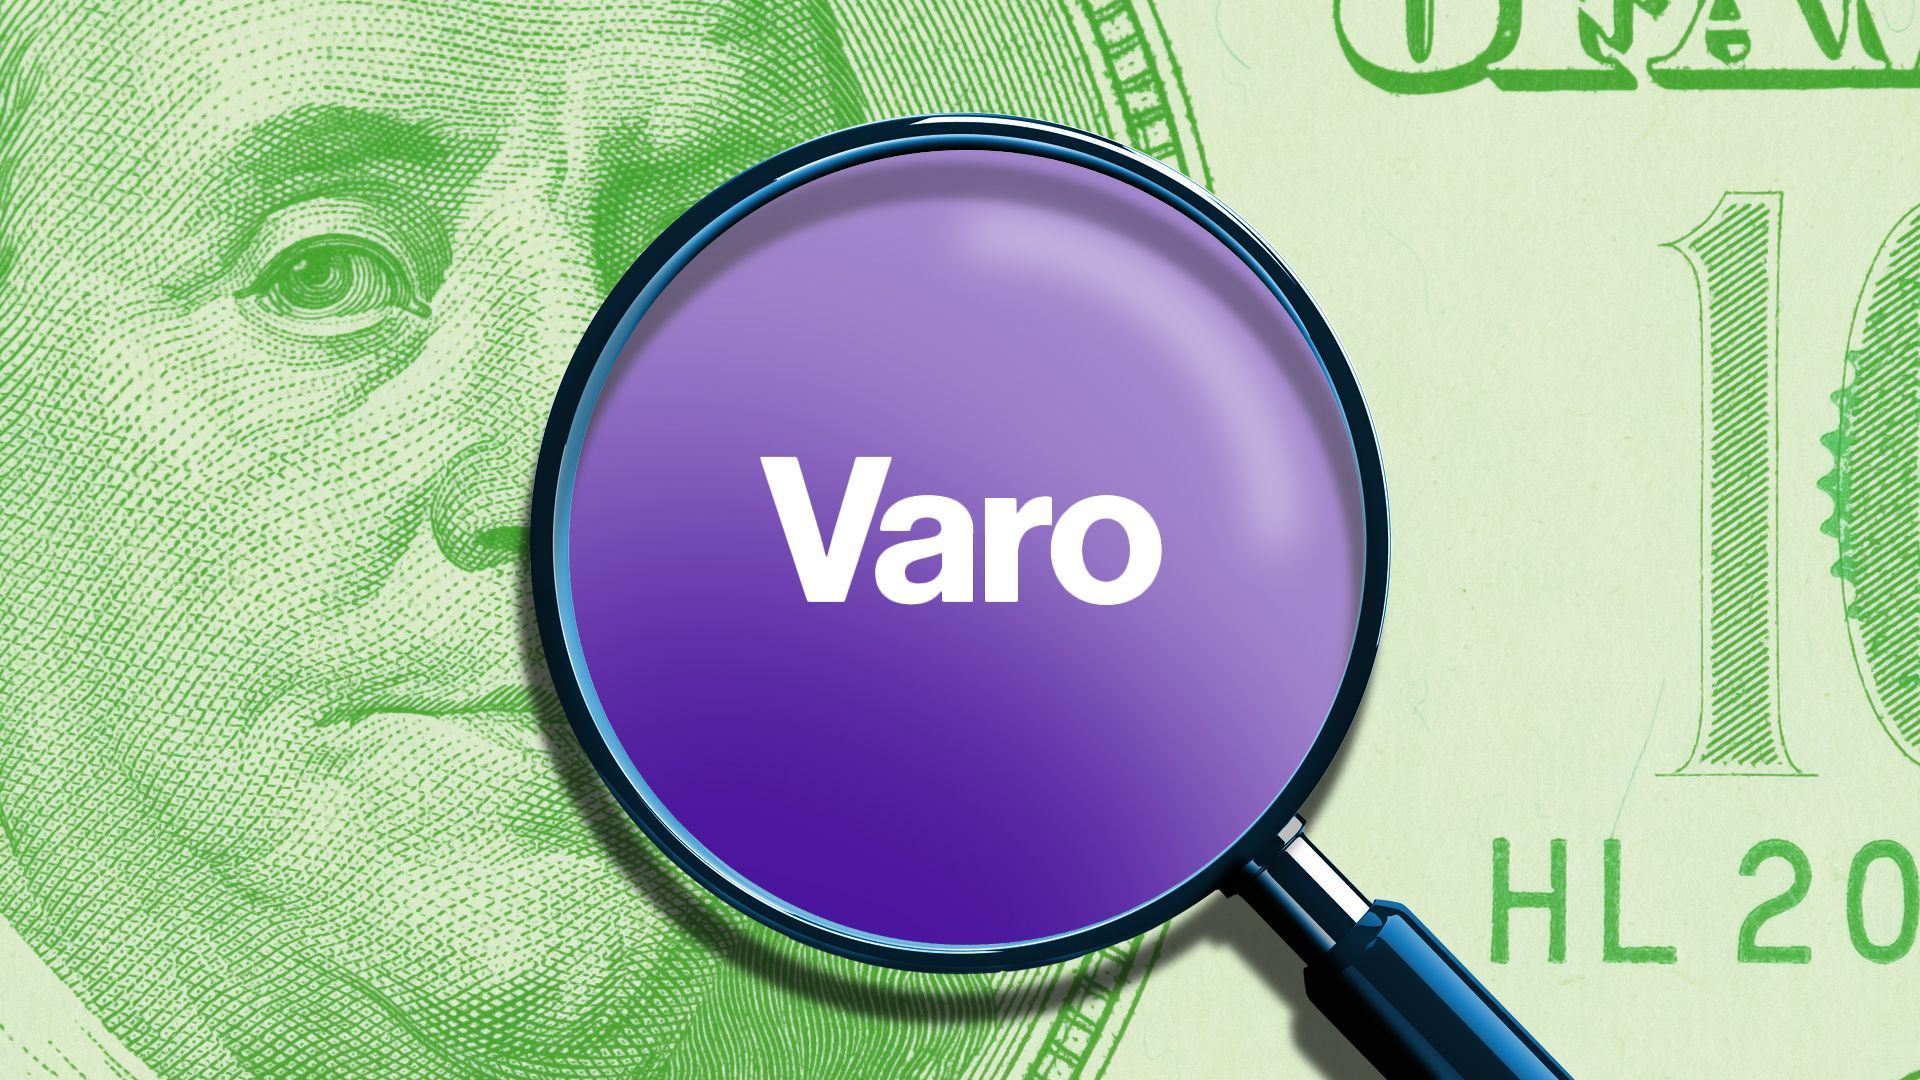 Illustration of a magnifying glass over a hundred dollar bill revealing the Varo logo